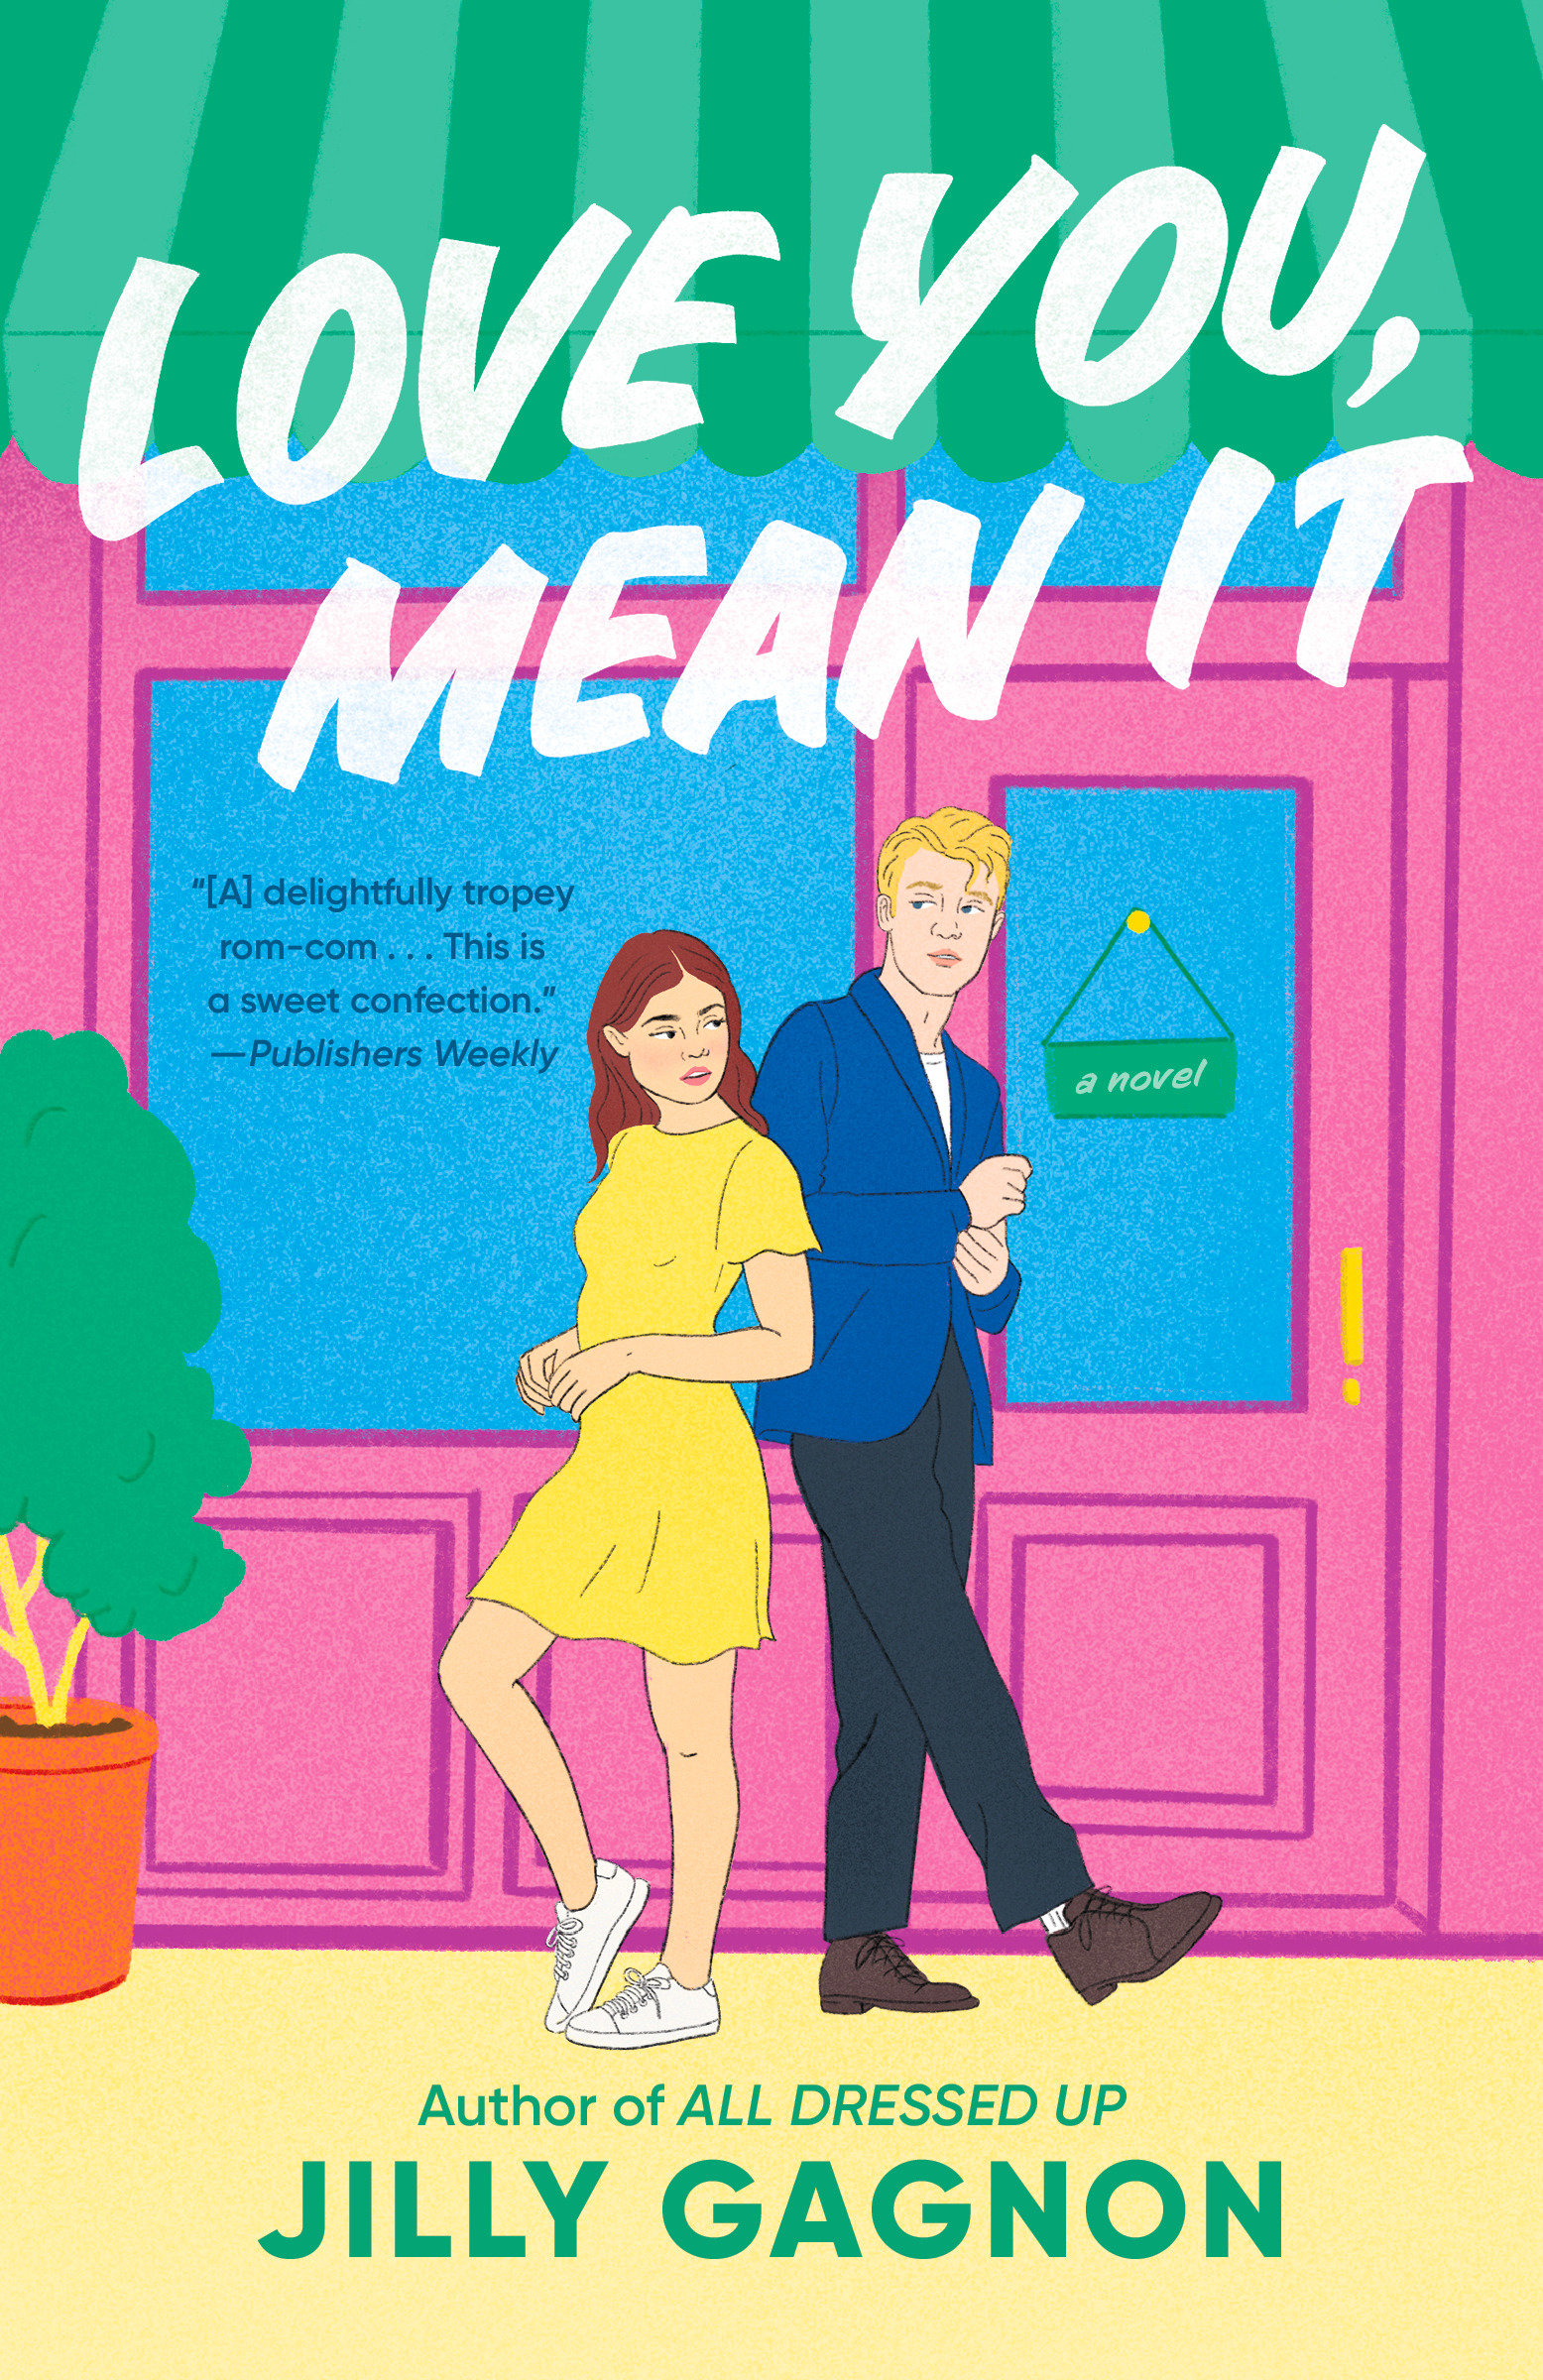 Love You, Mean It cover image